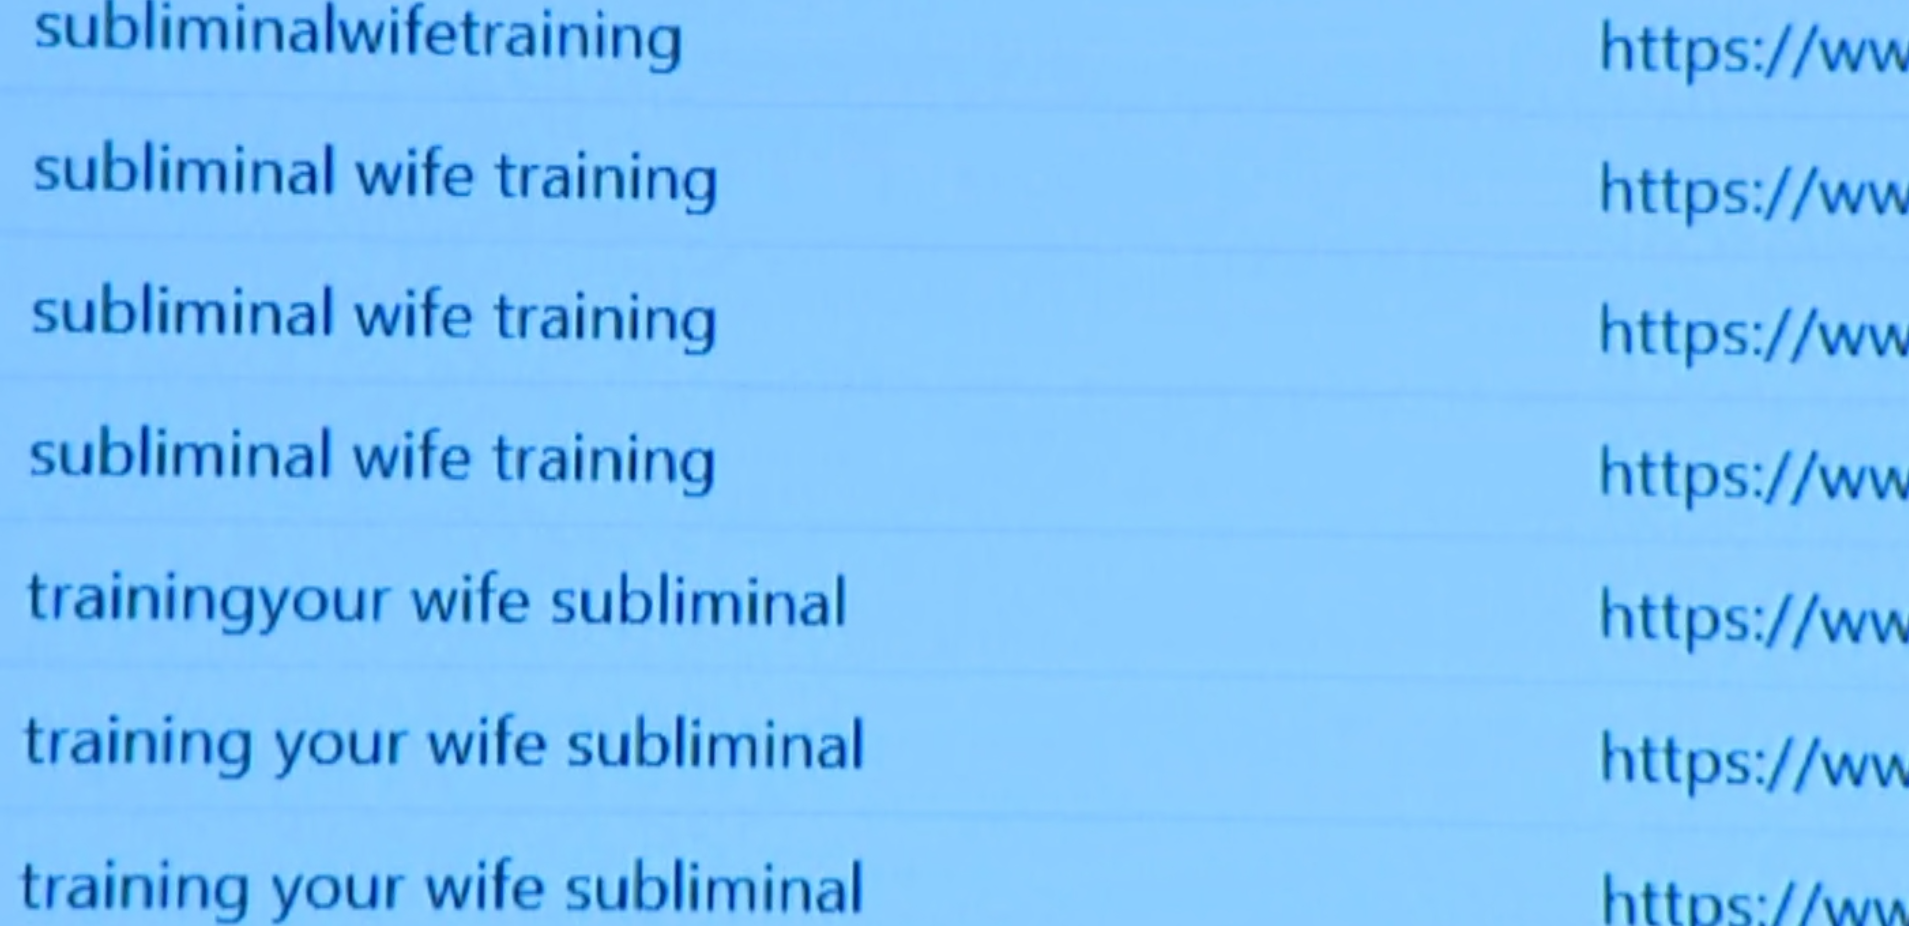 A screengrab shows an internet search history of the phrases &quot;subliminlal wife training&quot; and &quot;training your wife subliminal&quot;